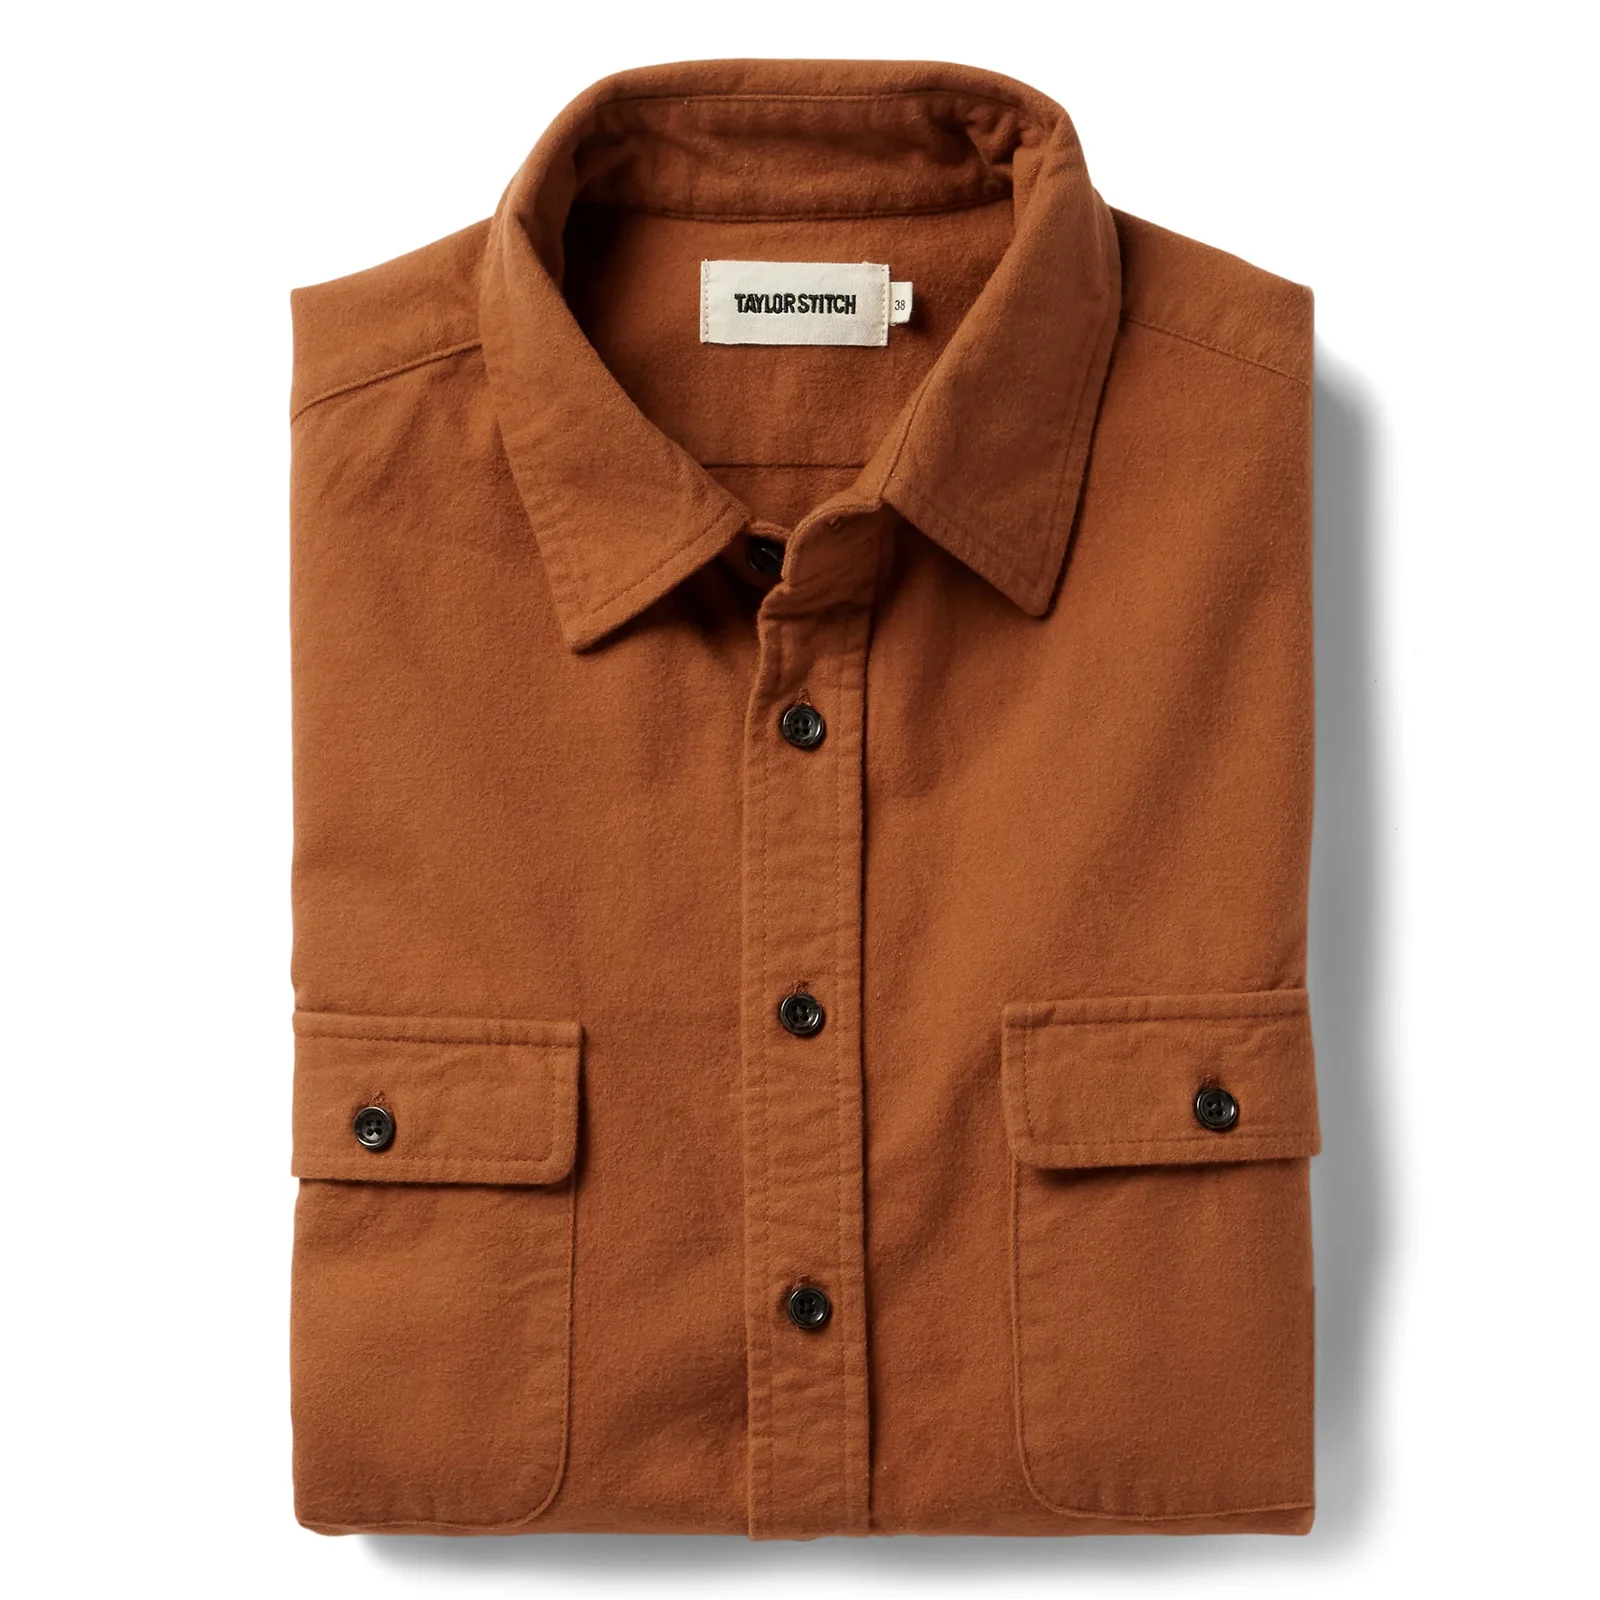 Image of The Yosemite Shirt in Copper